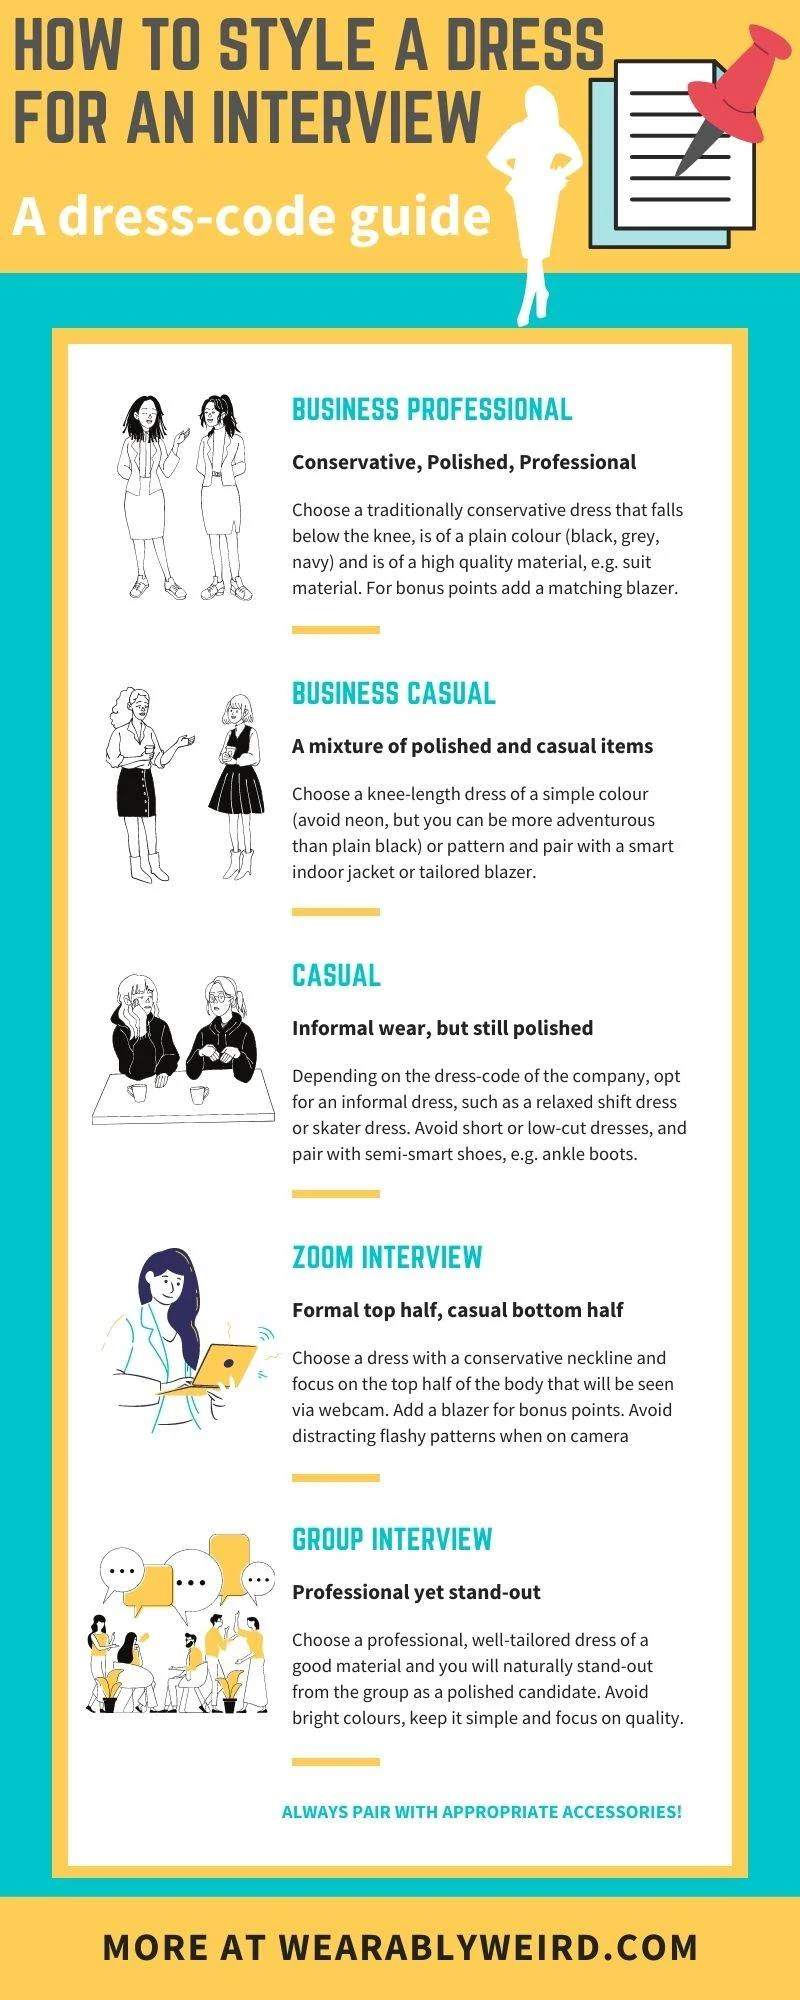 how to style a dress for an interview, are dresses appropriate for interviews